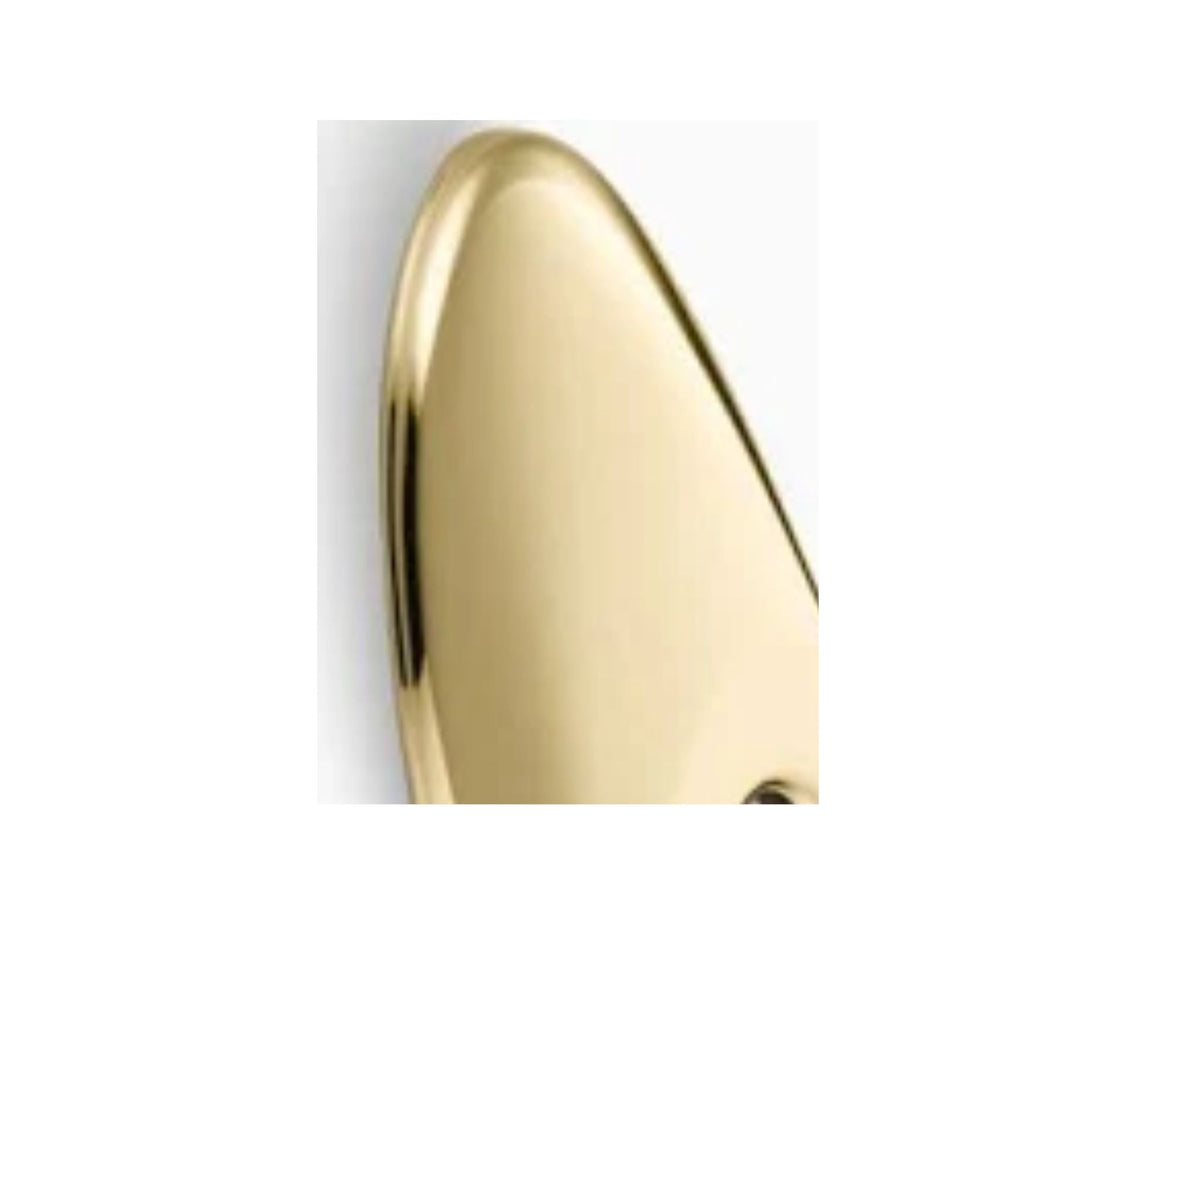 Zephyr Lock BE Brass Escutcheon Plate Is Available for All Built-In Combination Padlocks - The Lock Source